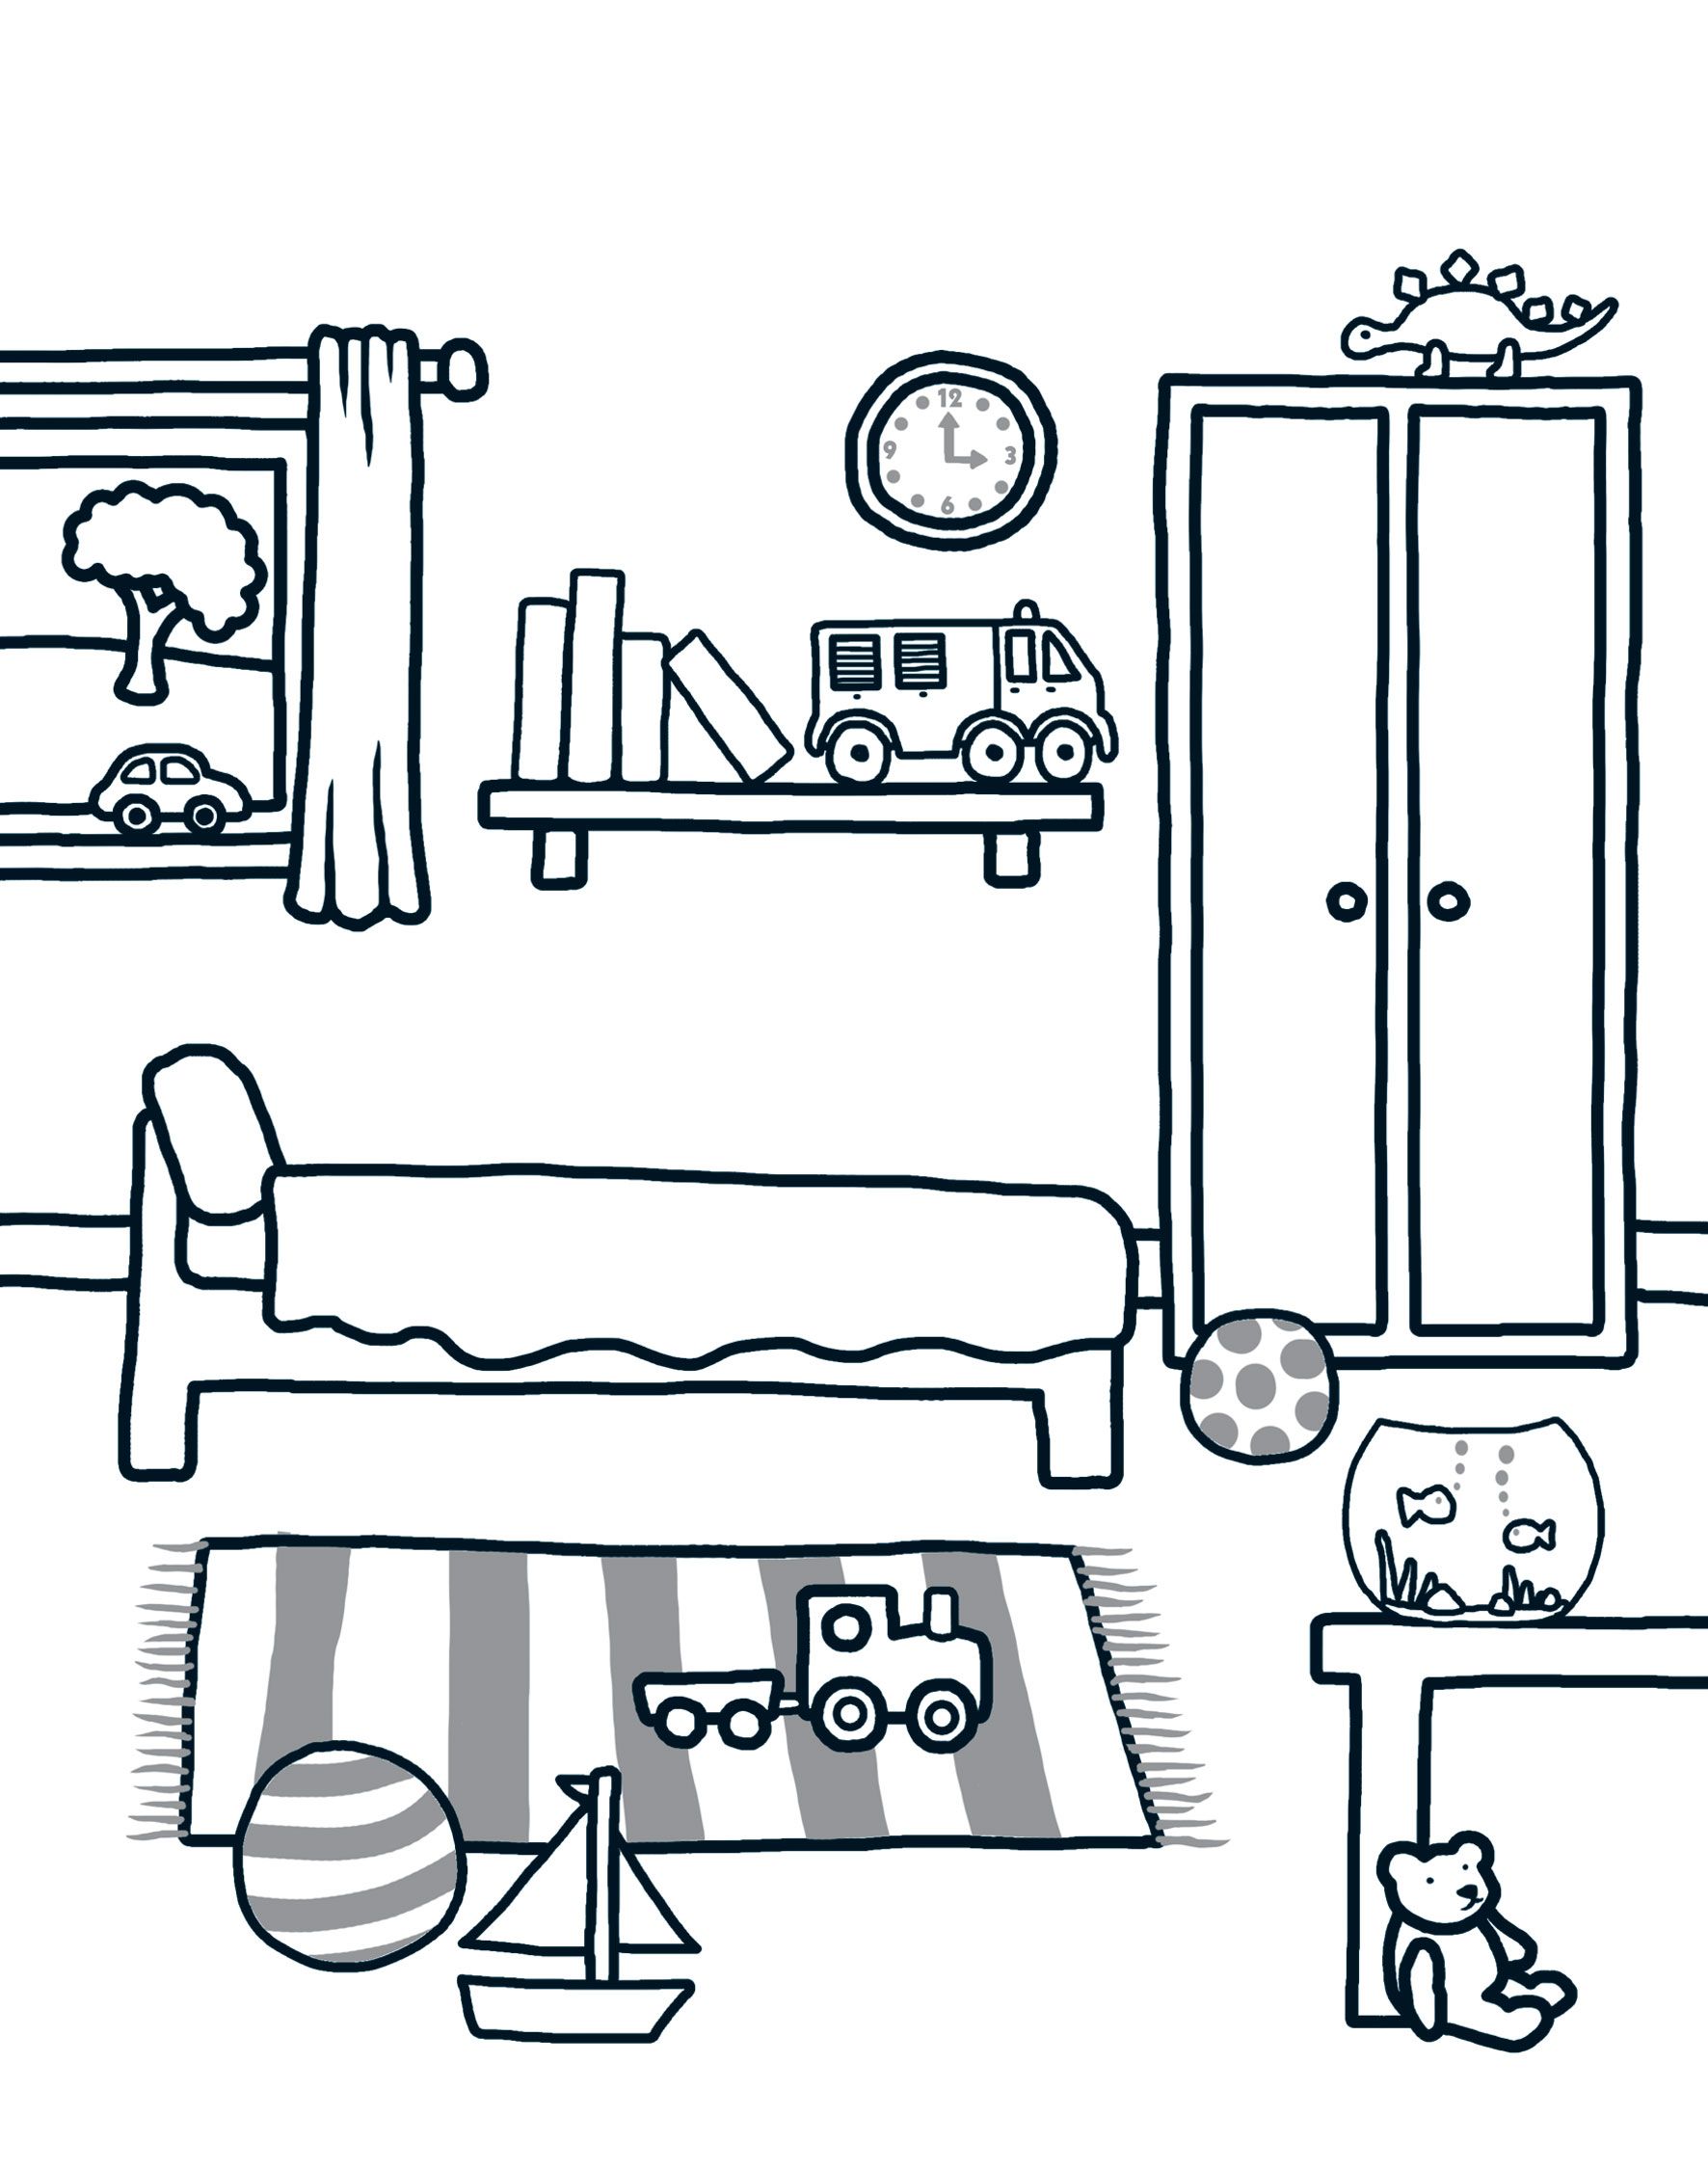 bed clipart coloring